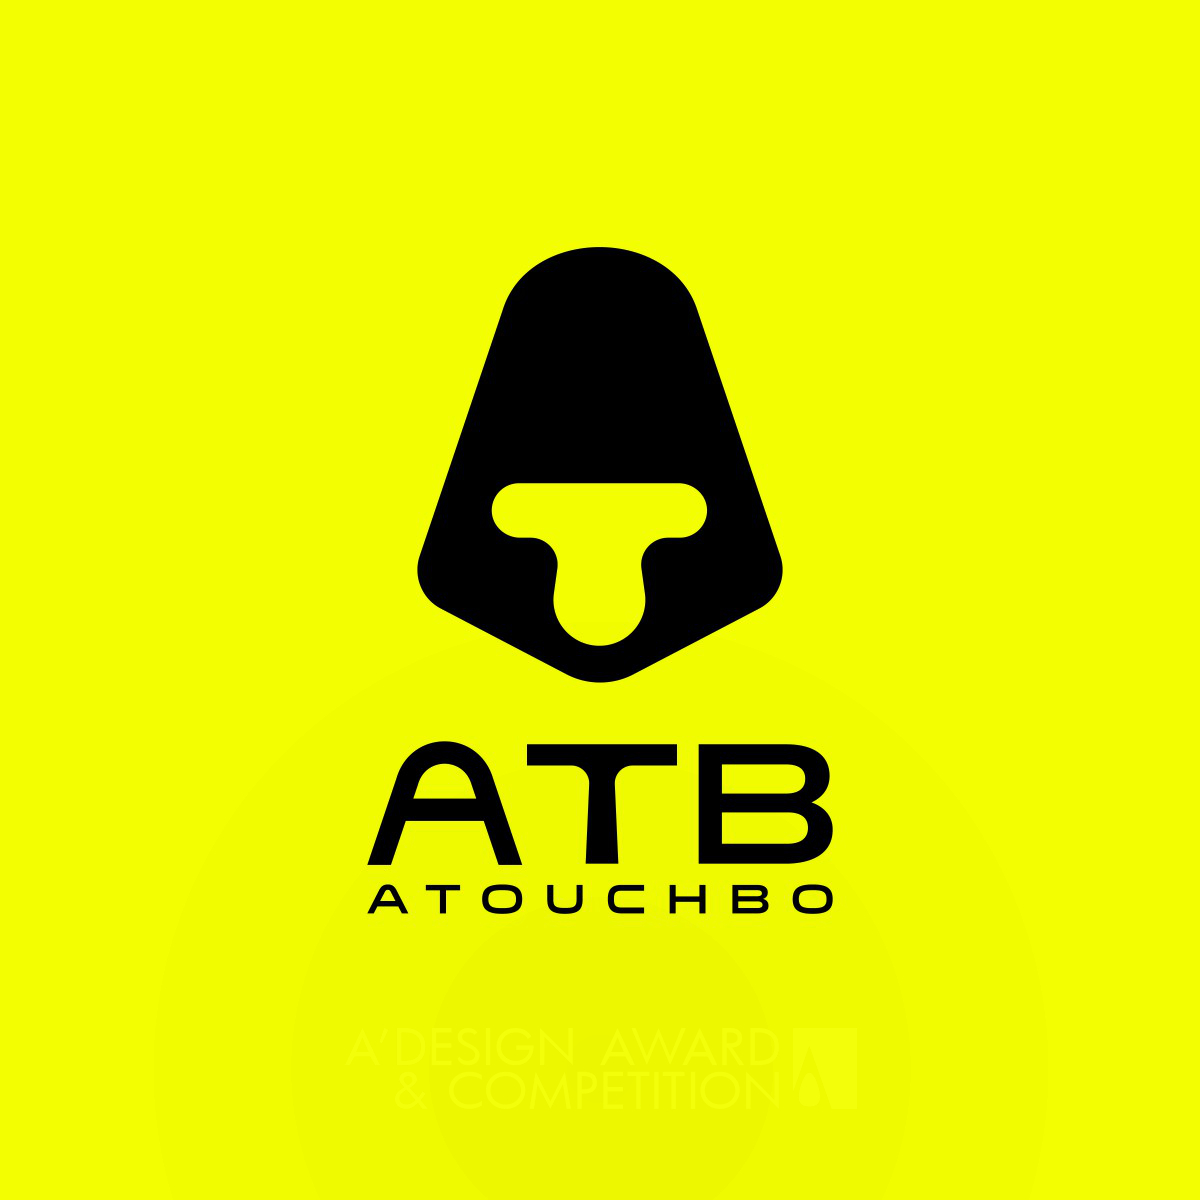 Atb Brand Identity by Menghao Zeng